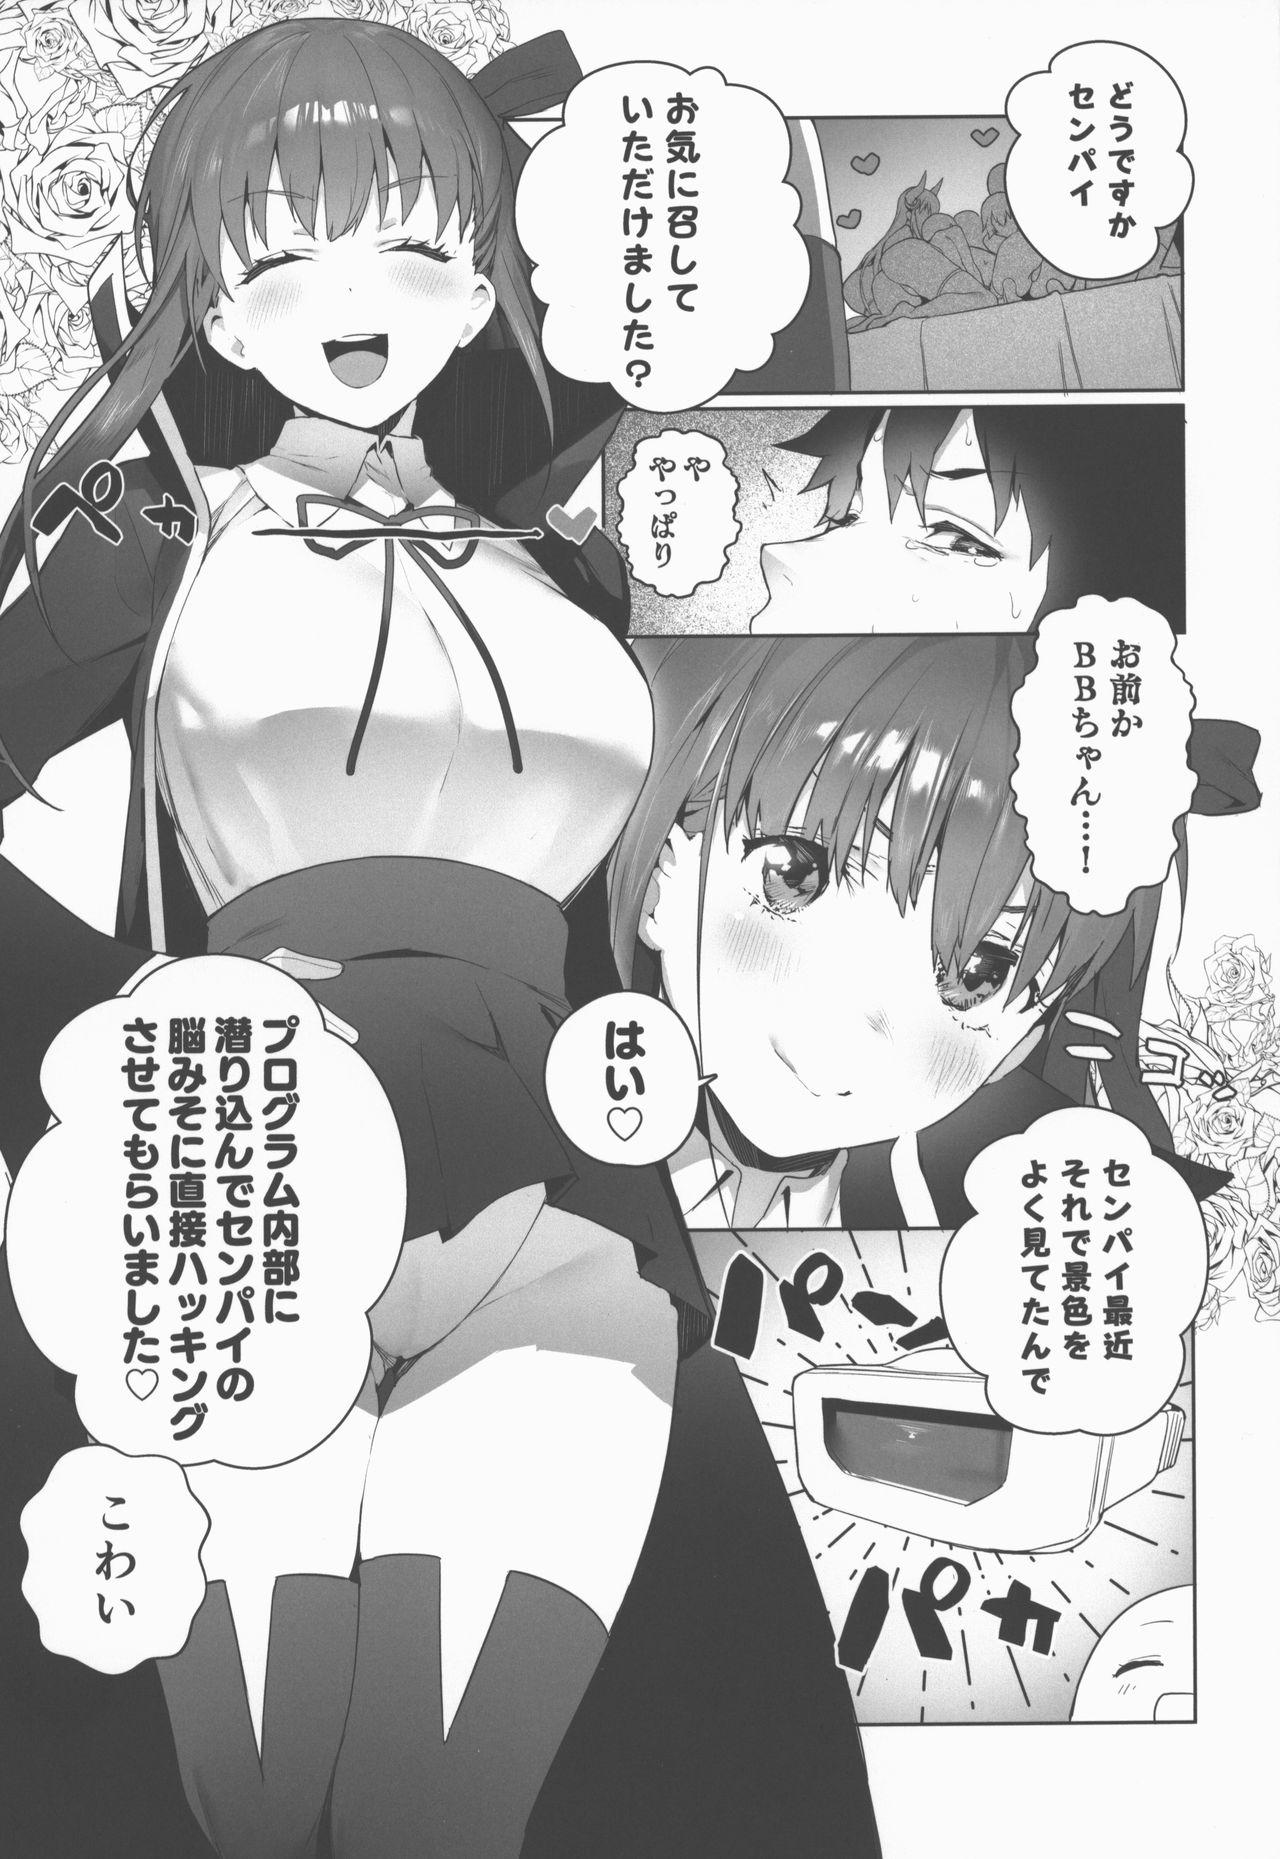 Wild Amateurs LOVELESS - Fate grand order Amature Allure - Page 4